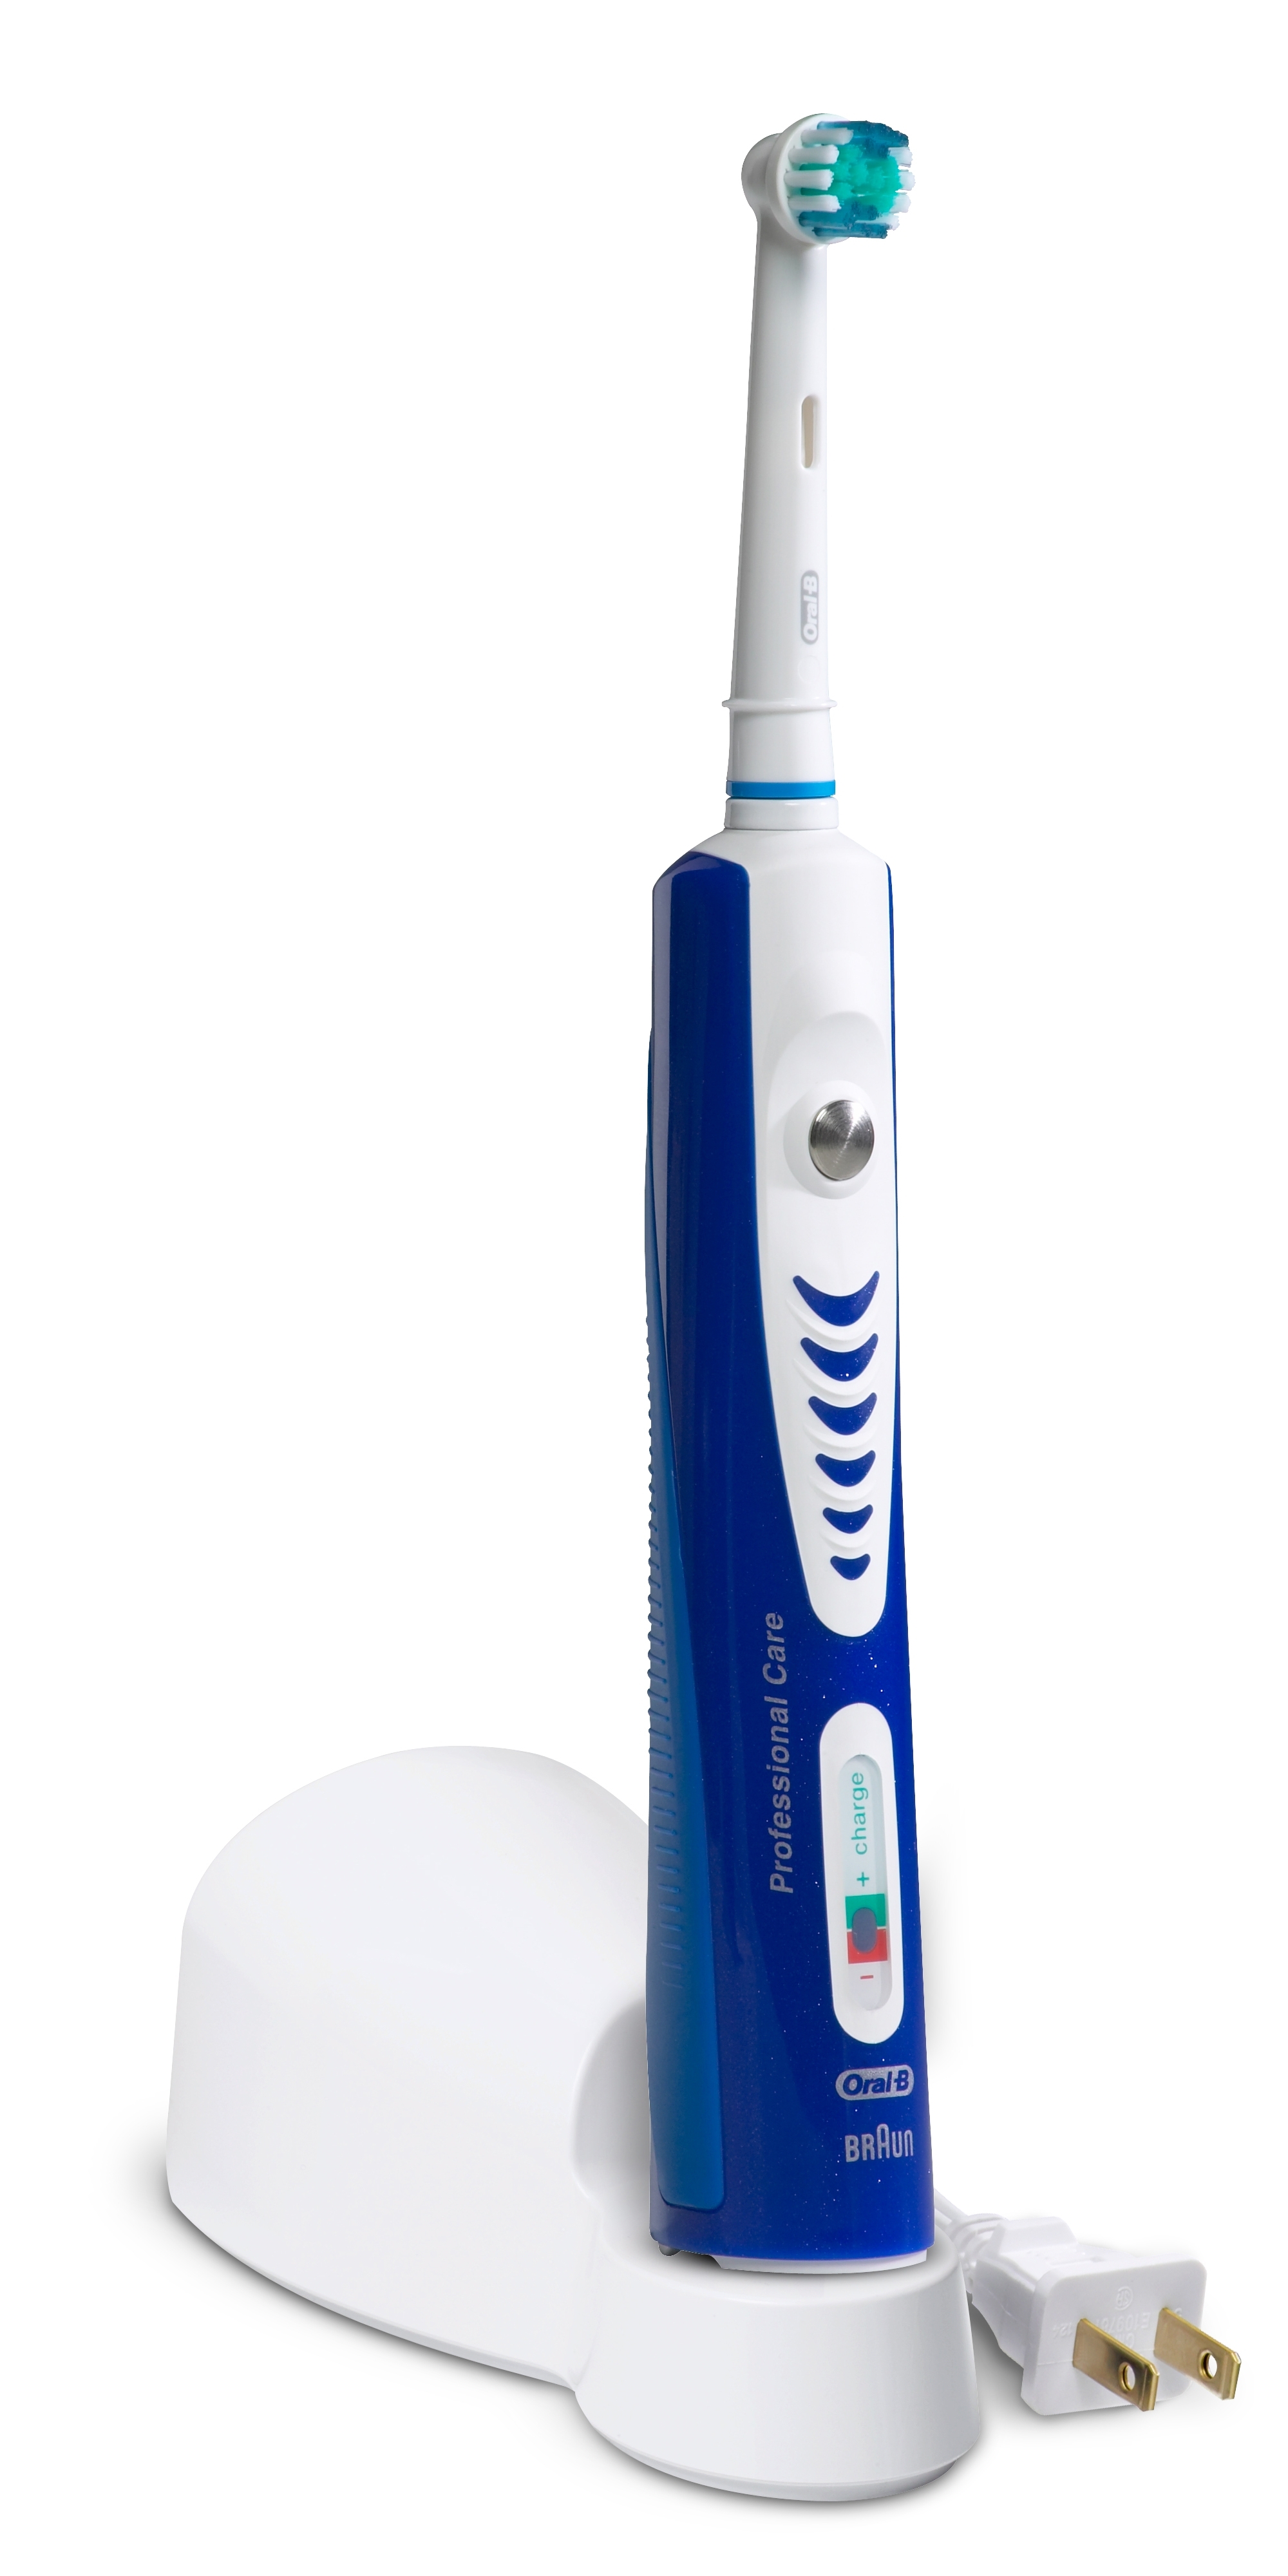 Cleaner Teeth with an Oral B Rechargeable Toothbrush  (Review + Giveaway)